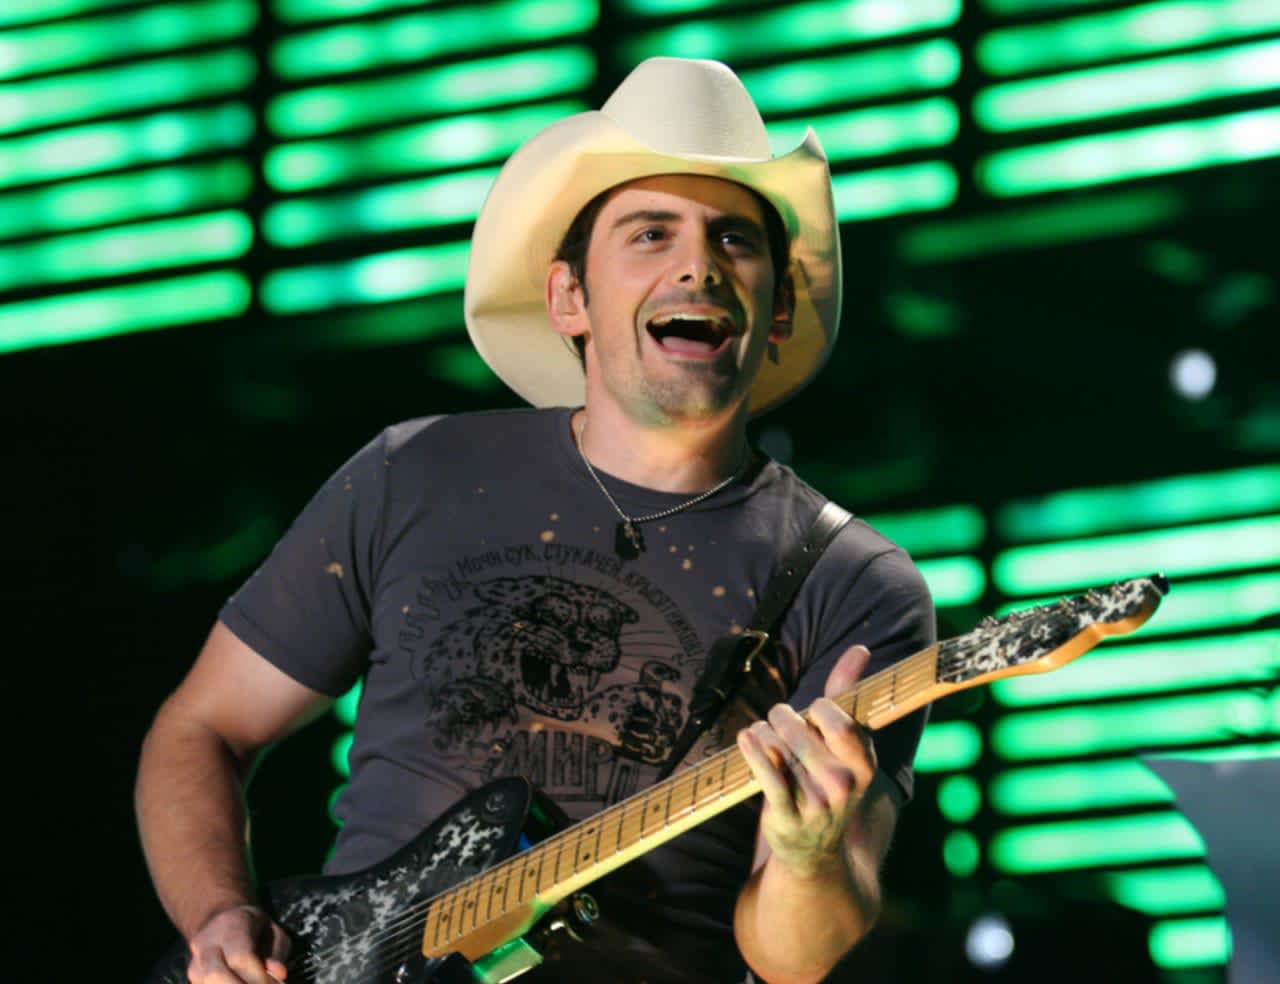 The Big E has plans to return in 2021 with country singer Brad Paisley headlining the two-week New England state fair.